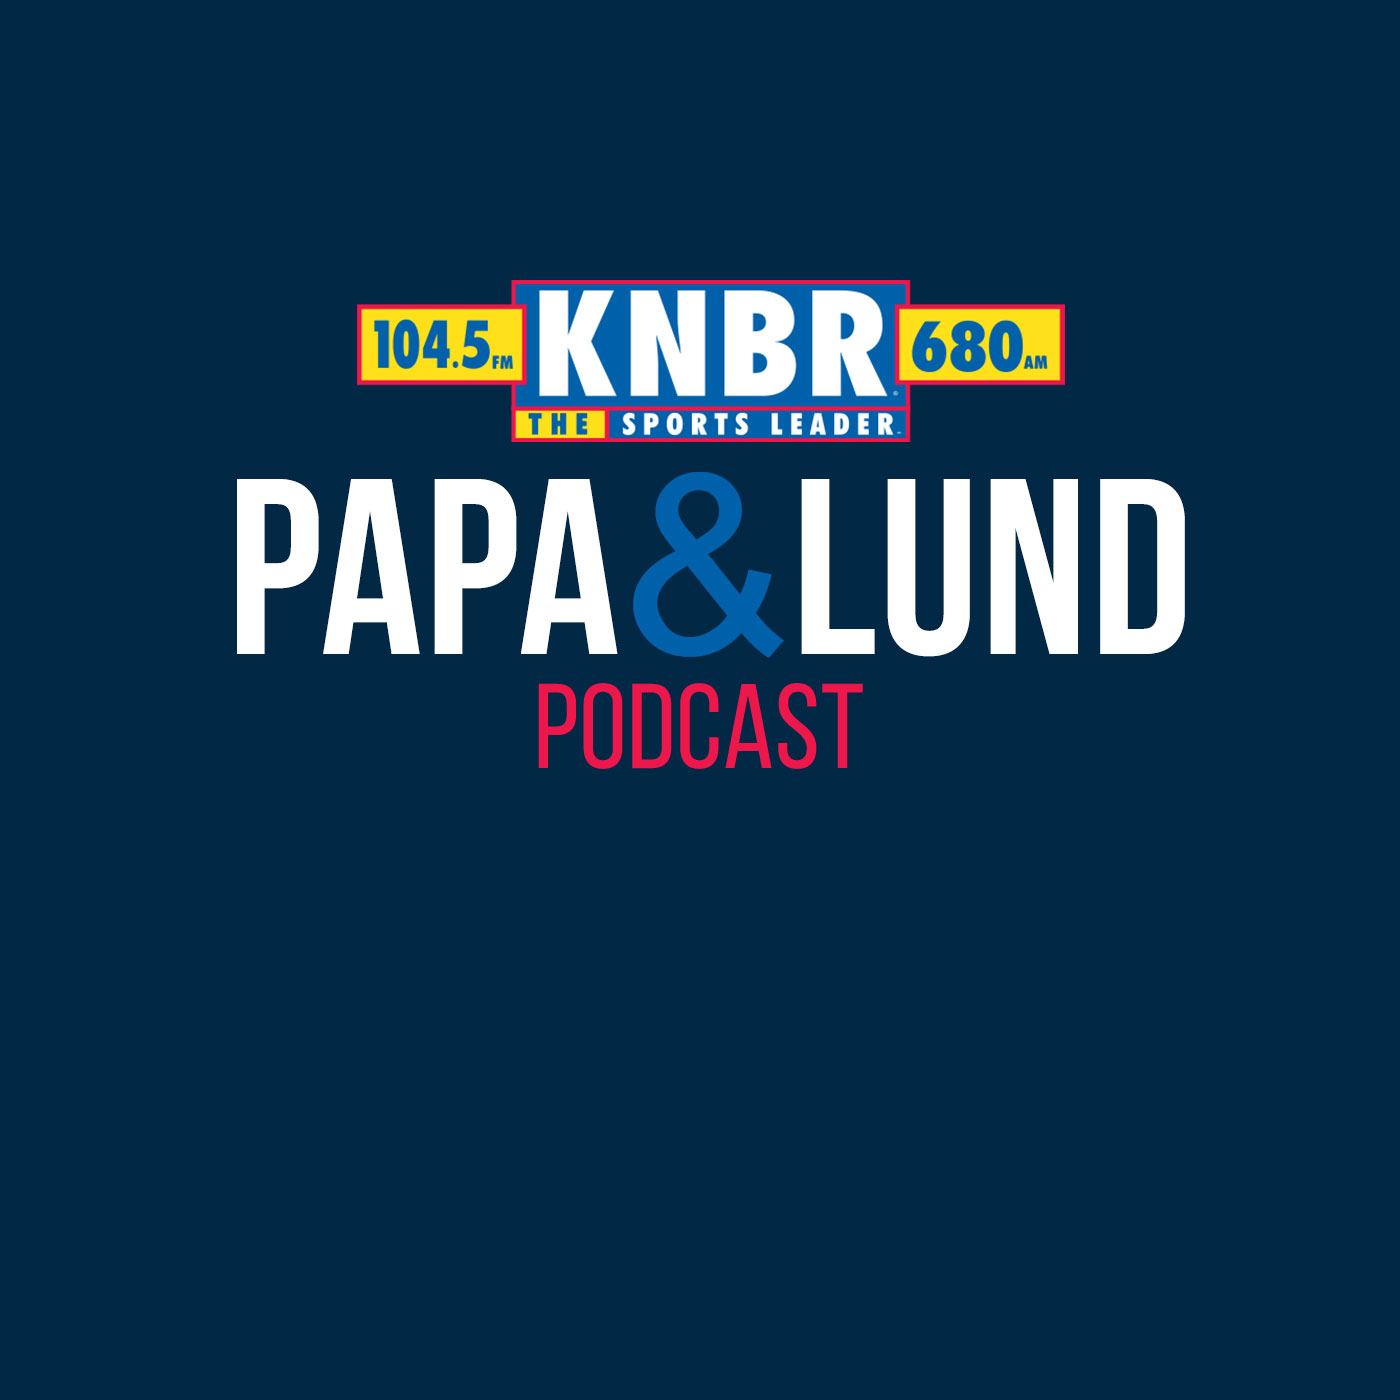 5-1 Dave Flemming tells Papa & Lund how he'd label the first month of the season after Bob Melvin refused the notion of a letter grade